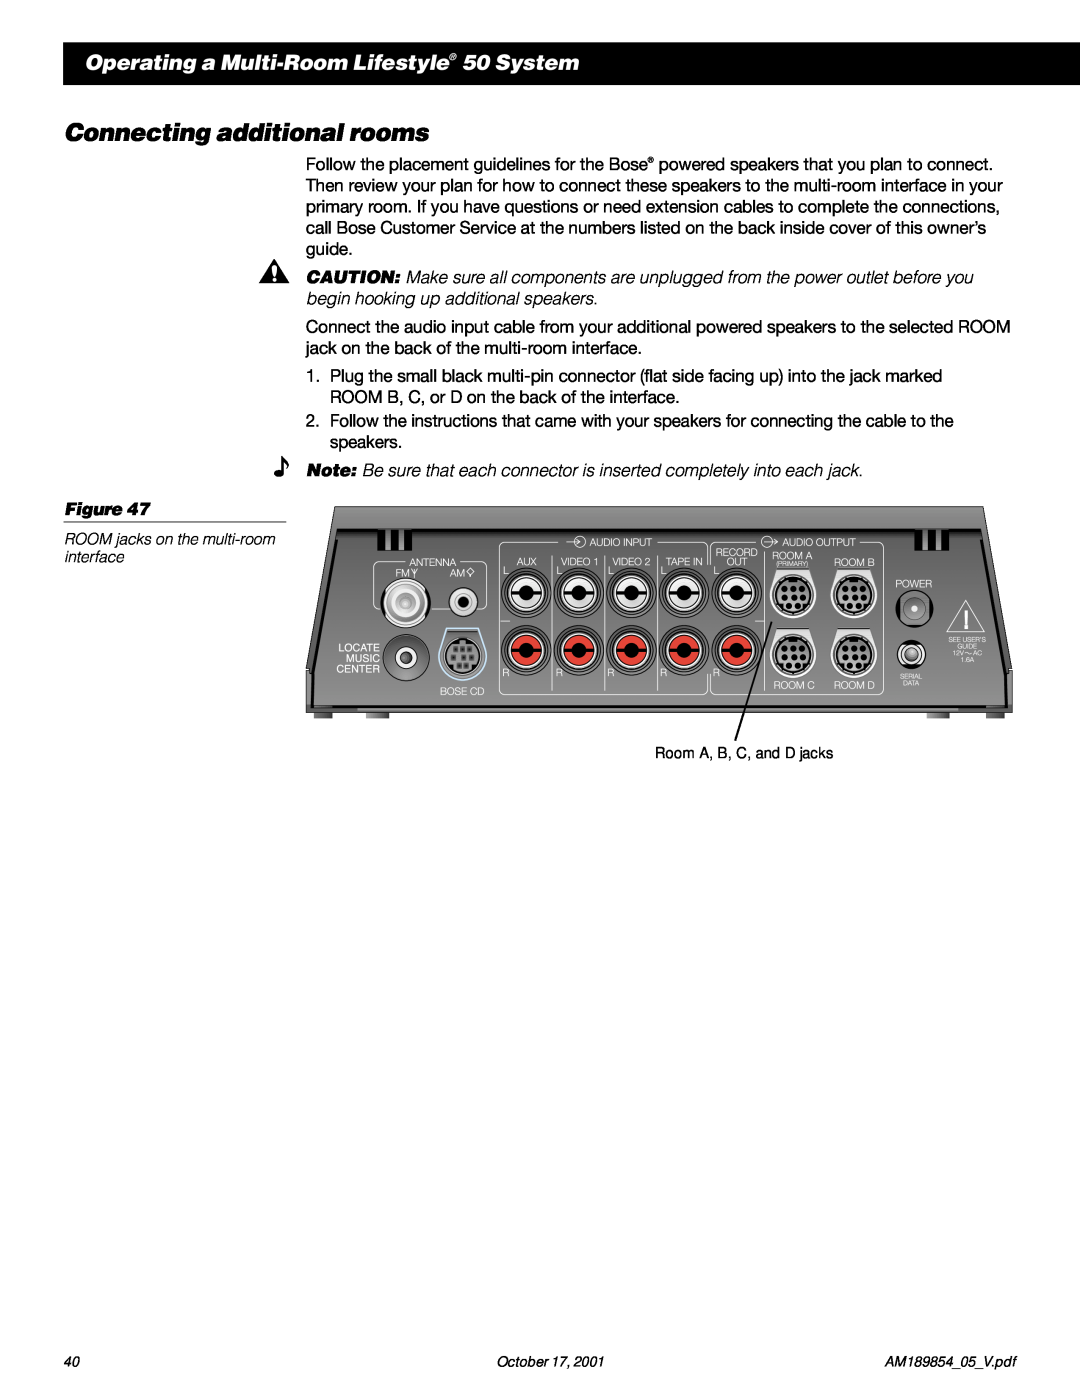 Bose manual Connecting additional rooms, Operating a Multi-RoomLifestyle 50 System 